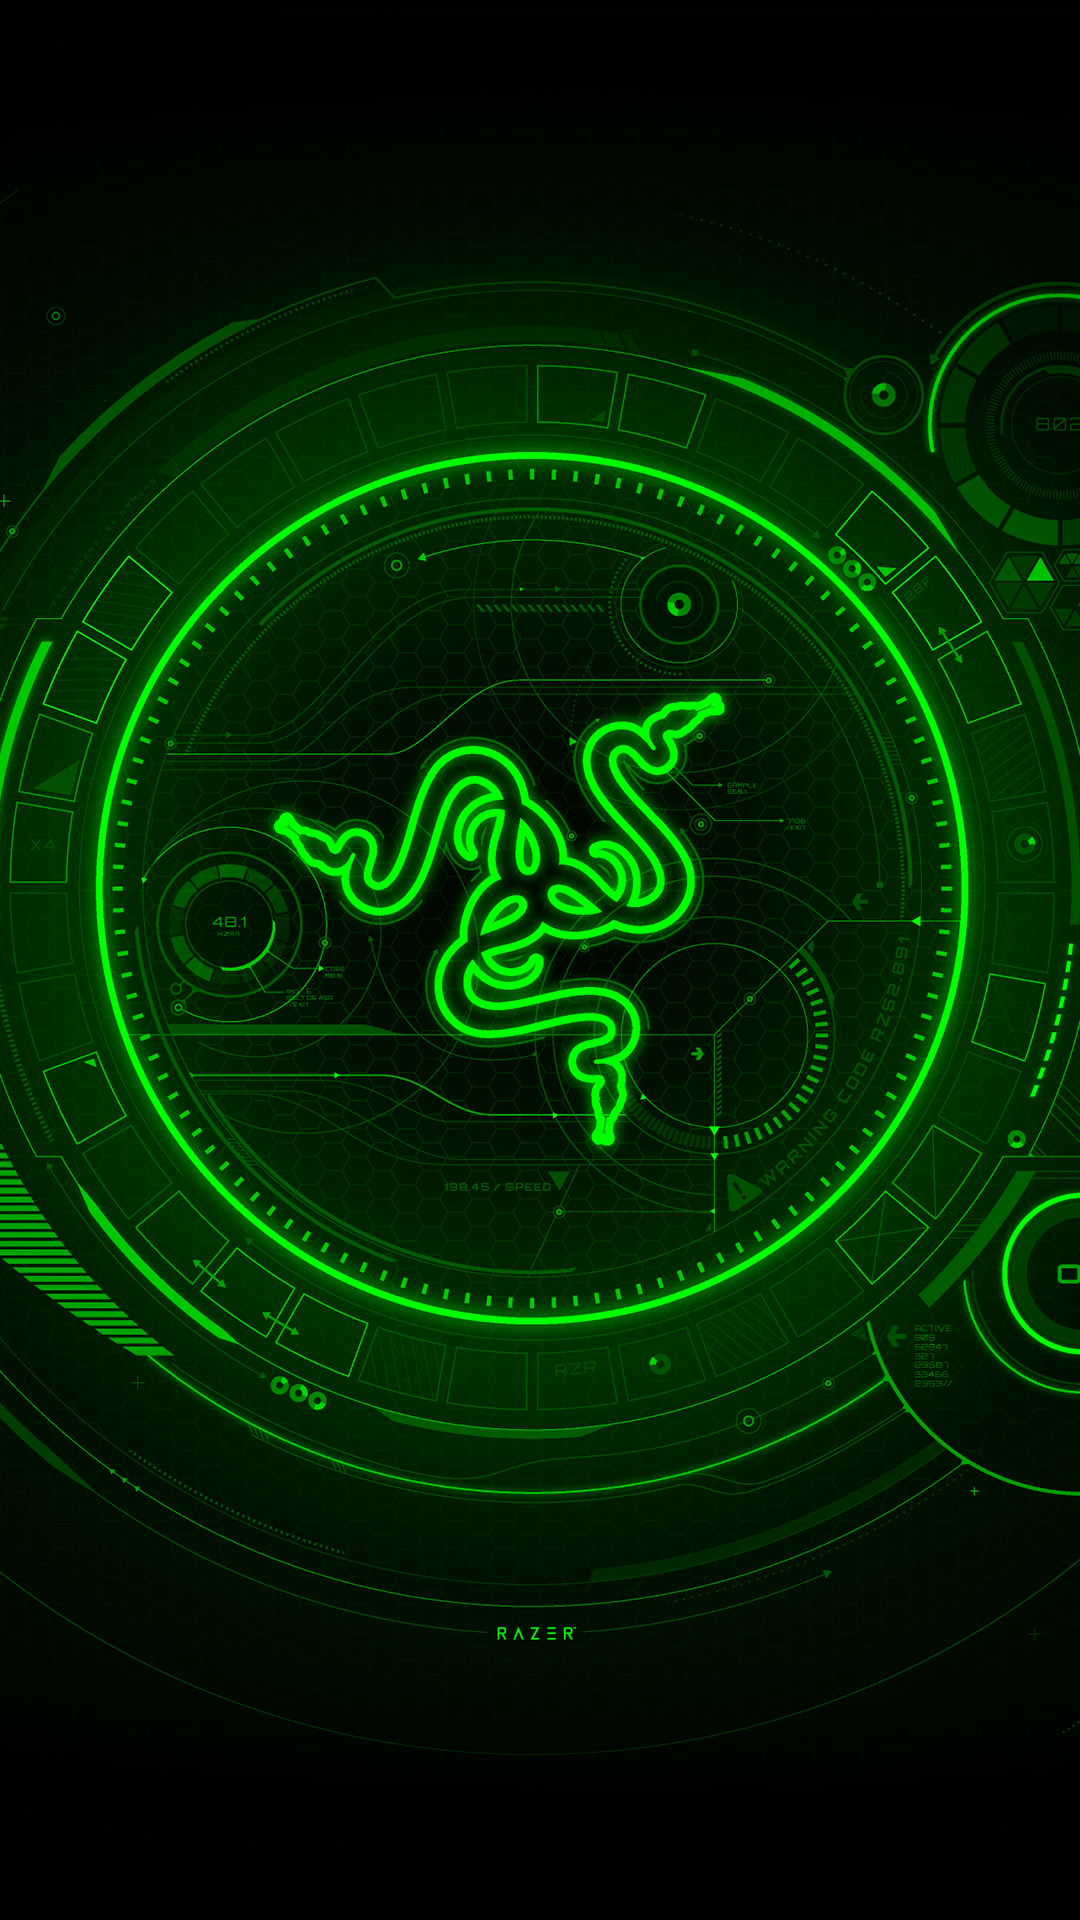 Download RAZER Phone Stock Wallpapers in QHD (Updated) - DroidViews